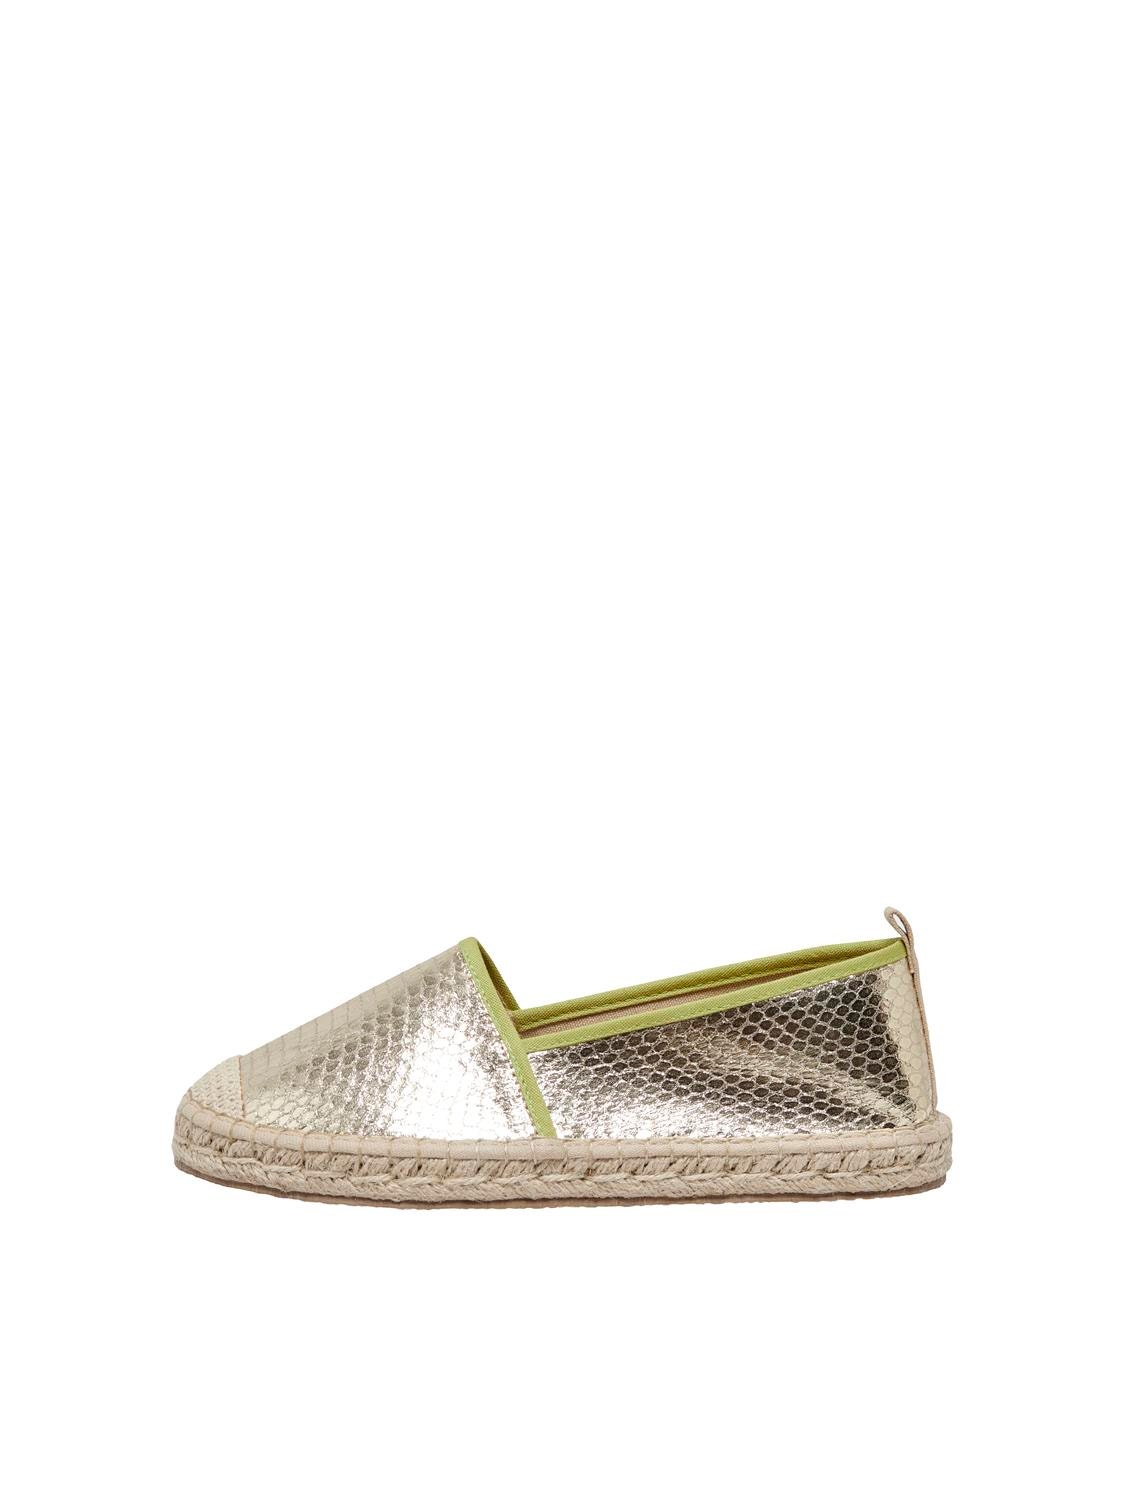 ONLY Round toe Espadrilles -Gold Colour - 15288106